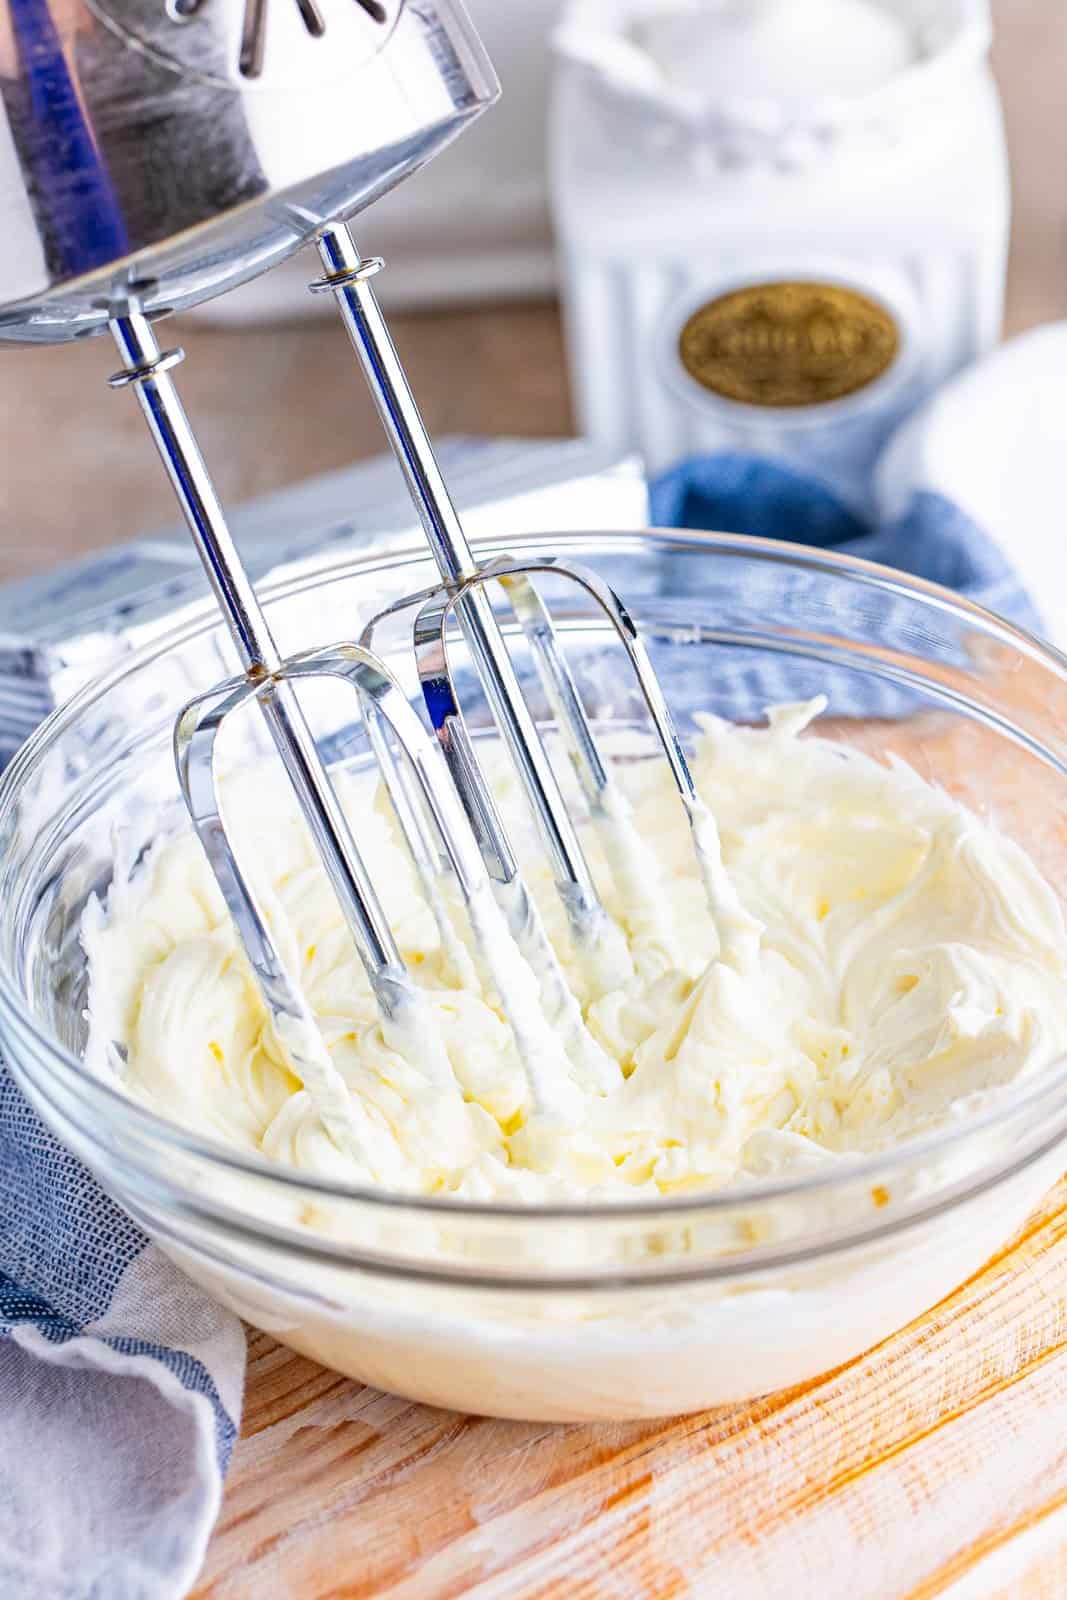 Electric mixer beaters in a glass bowl of softened cream cheese.